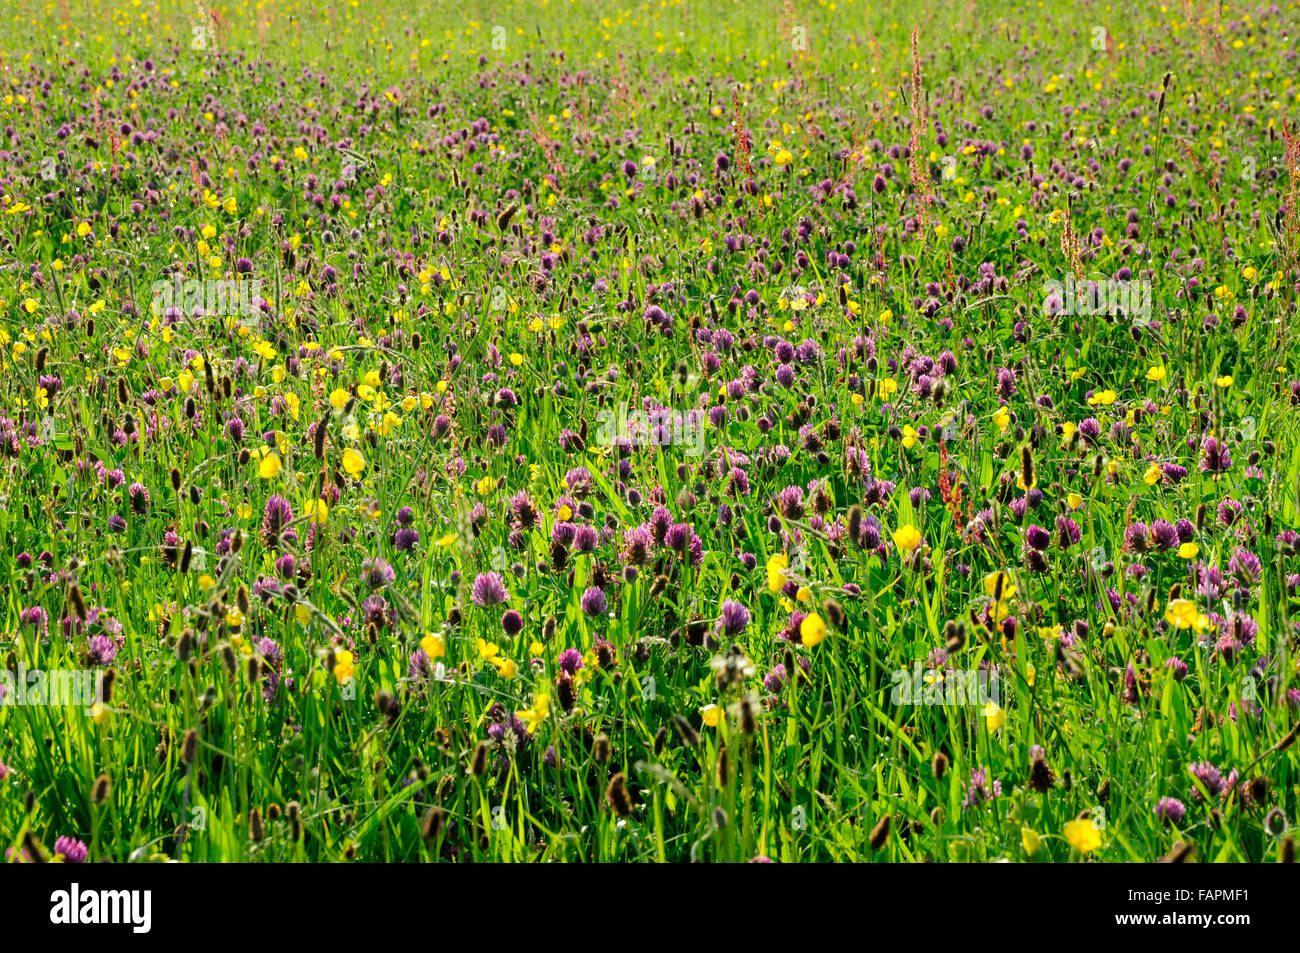 English summer meadow full of wildflowers. Mass of purple clover and yellow buttercups. Stock Photo